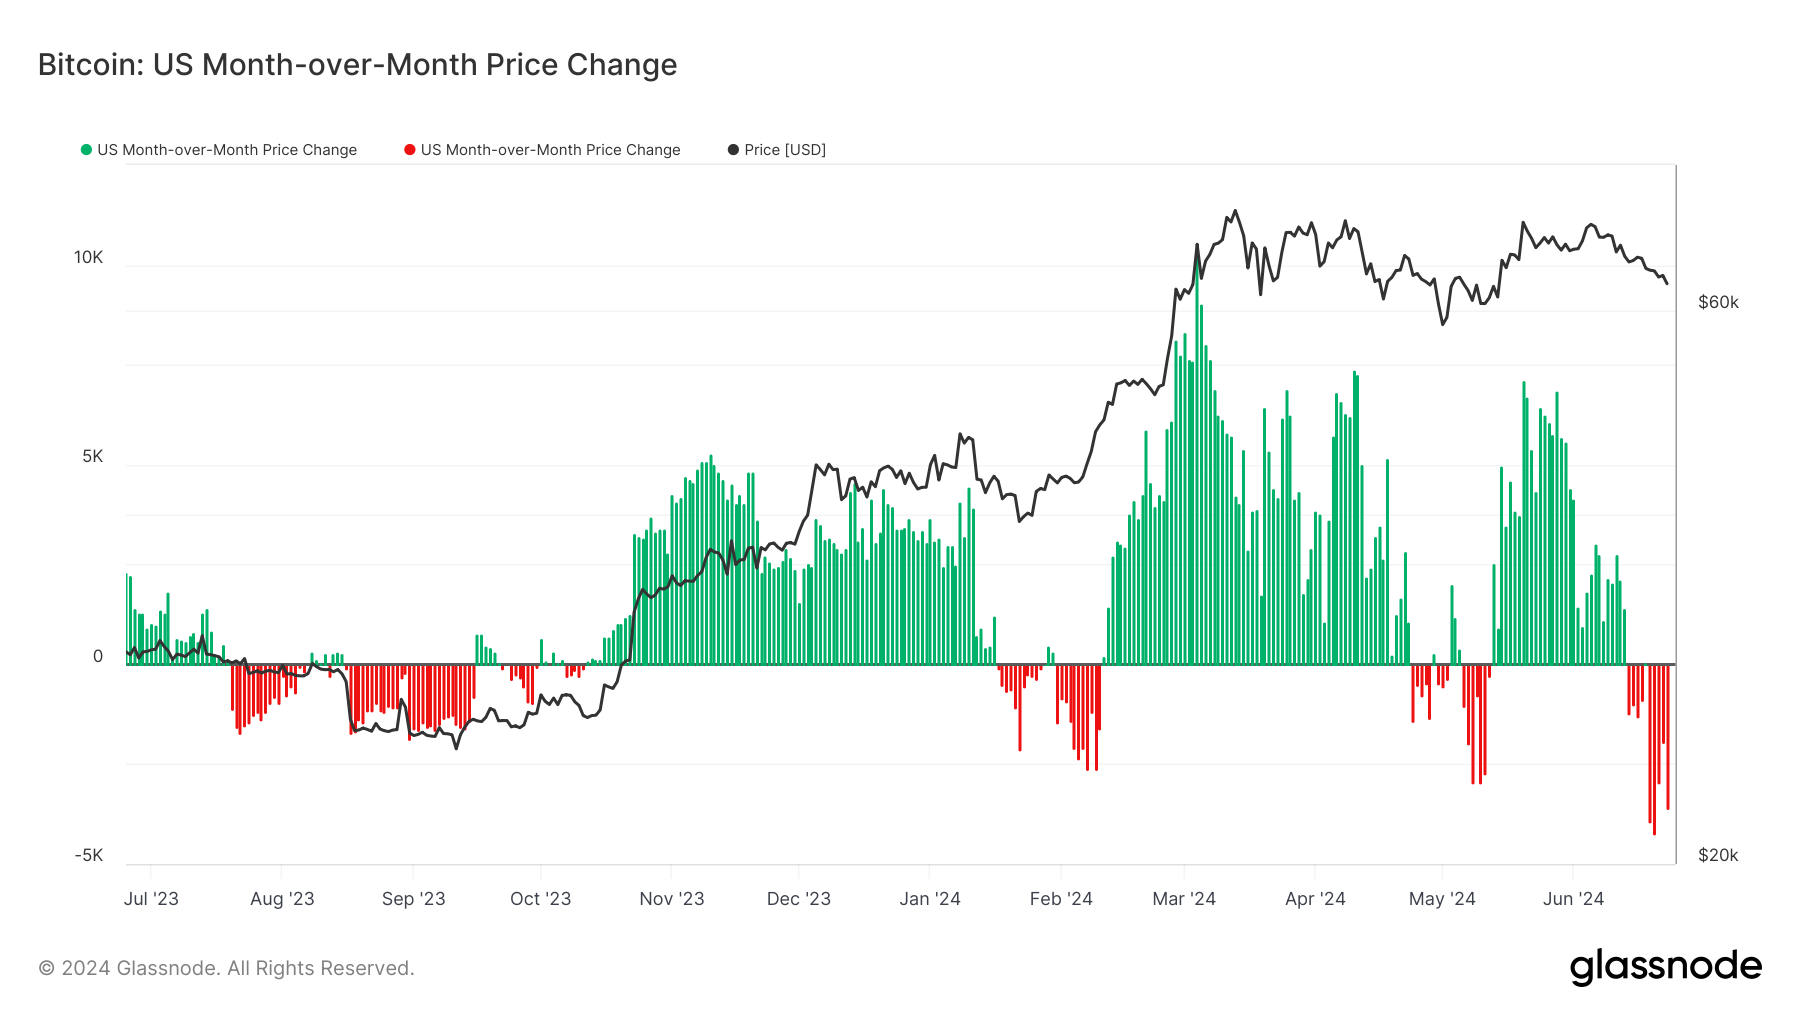 Bitcoins post-halving volatility during US hours reveals historical patterns